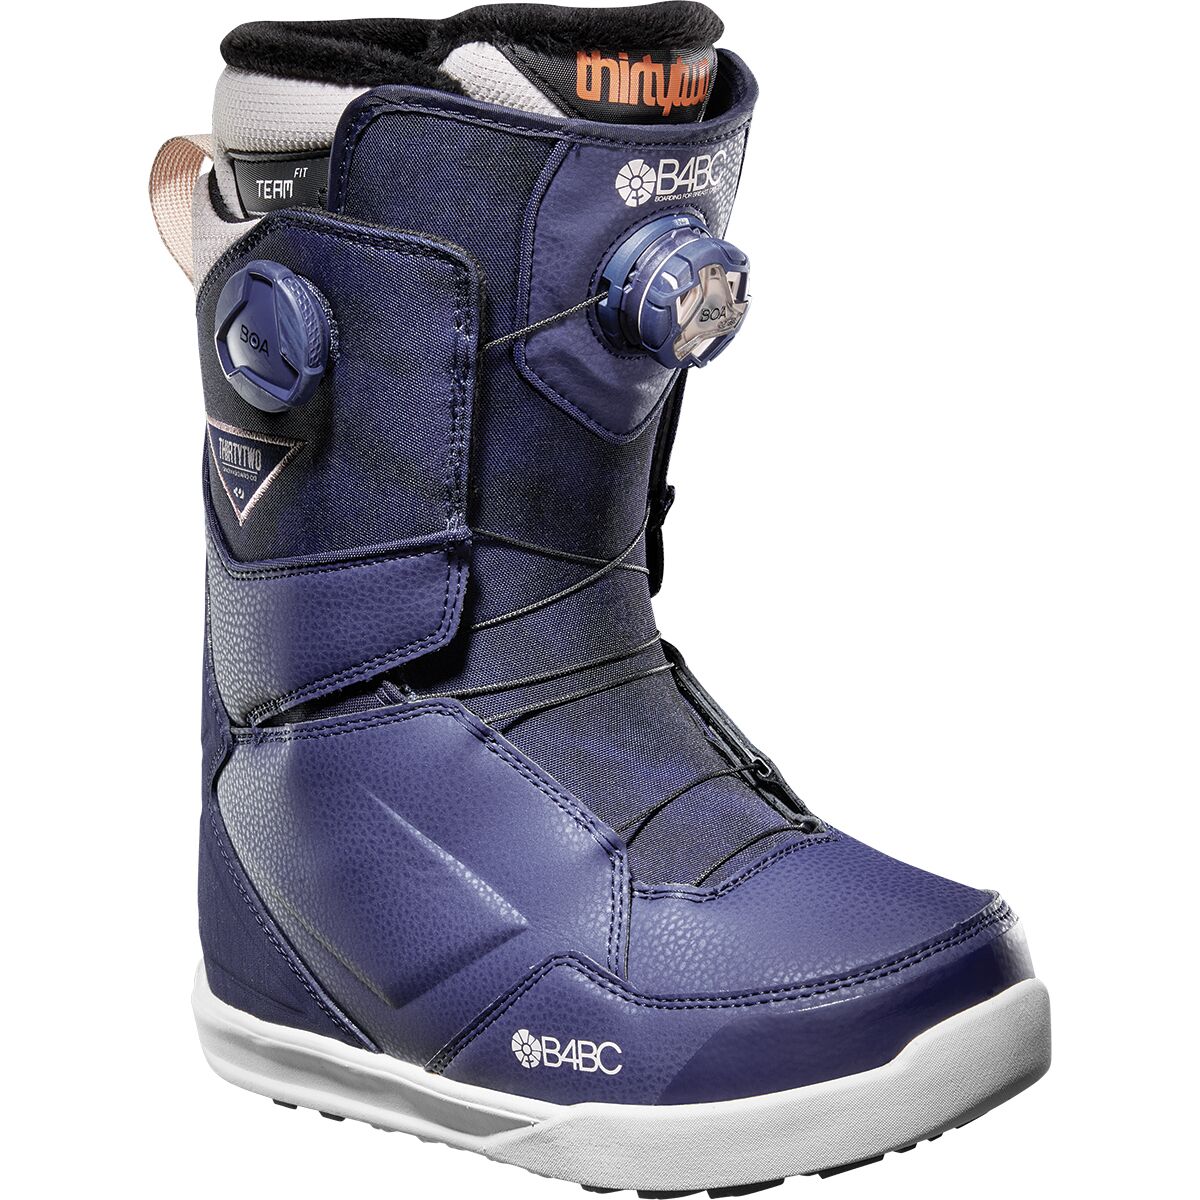 ThirtyTwo Lashed Double Boa B4BC Snowboard Boot - Women's